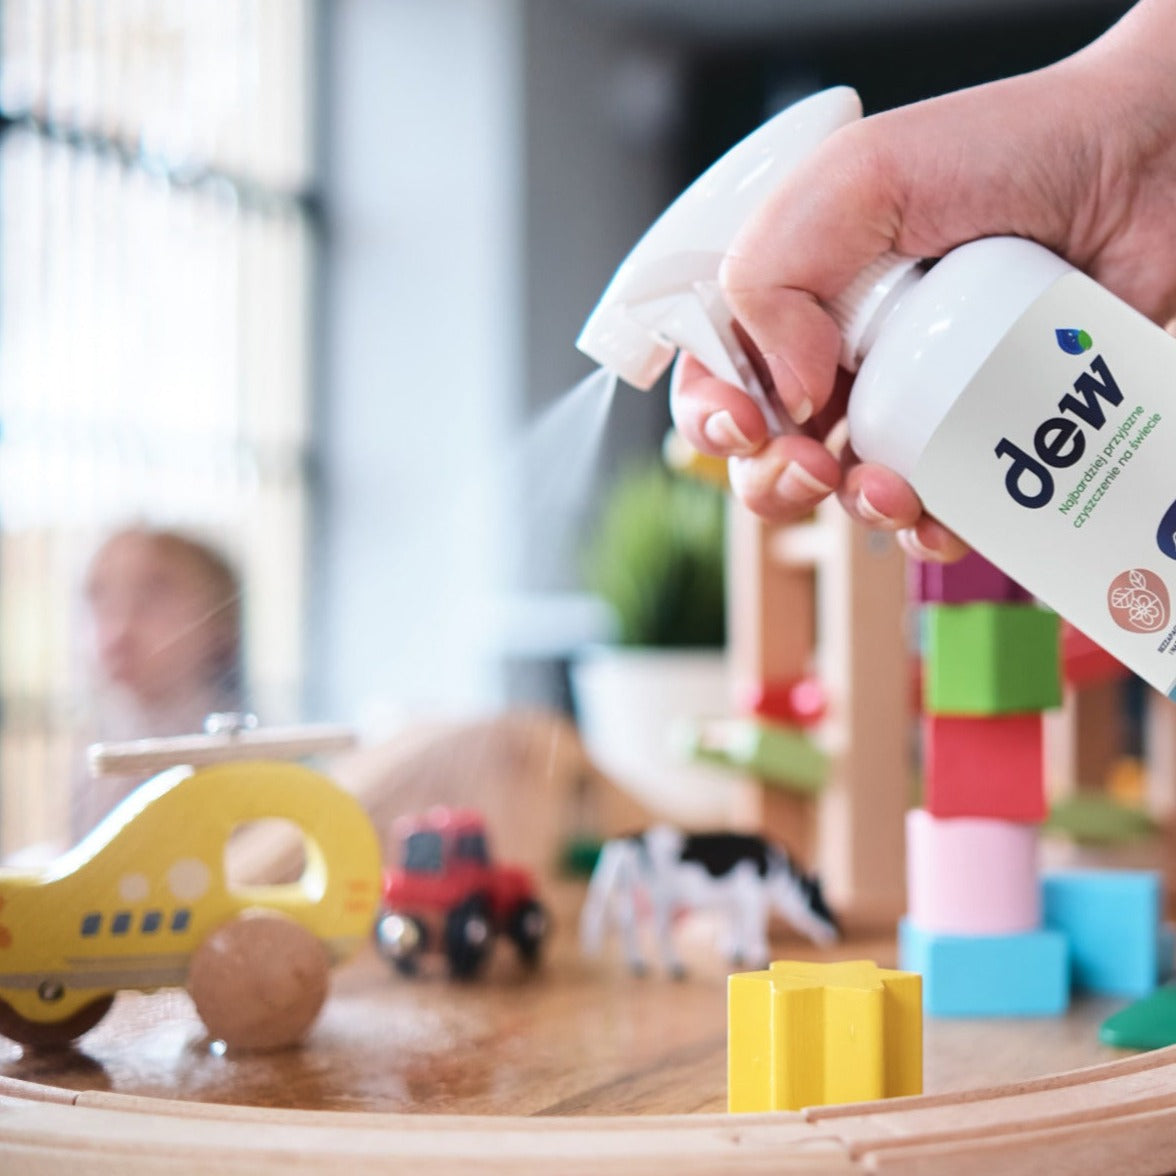 Dew: Disinfected measure for toys and other surfaces of children 500 ml